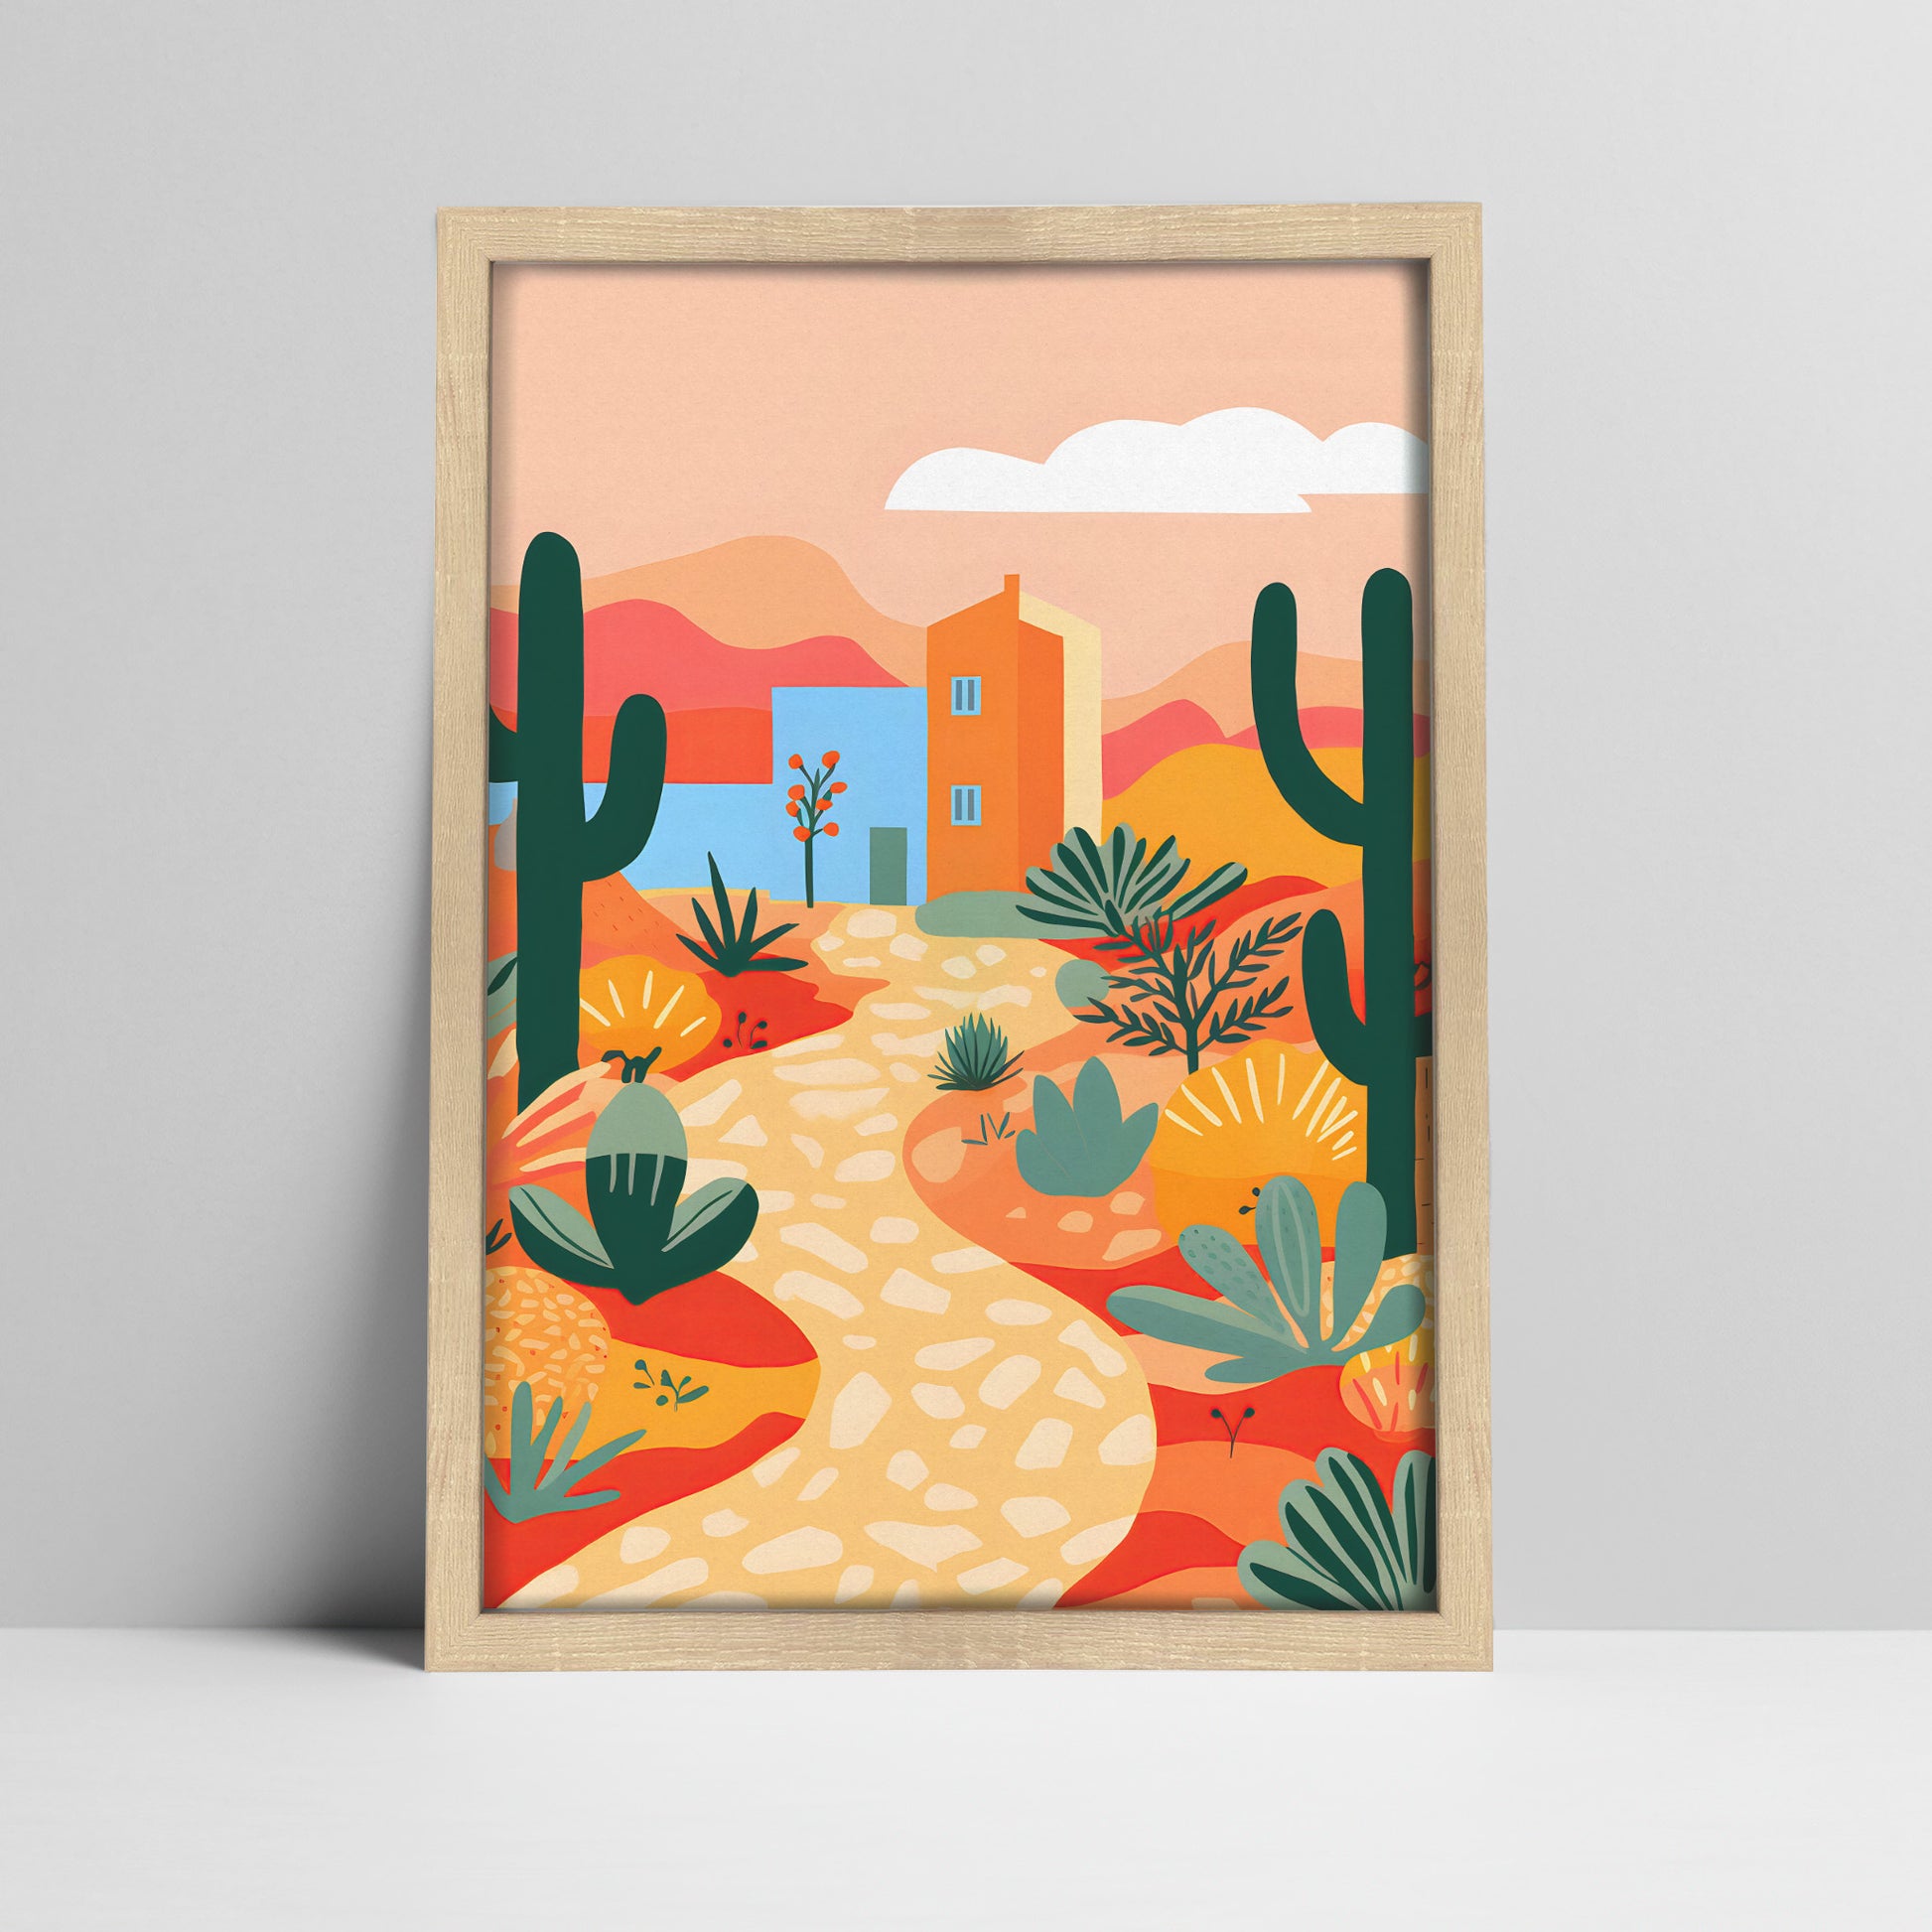 Art print of desert landscape illustration with cacti and house in a light wood frame